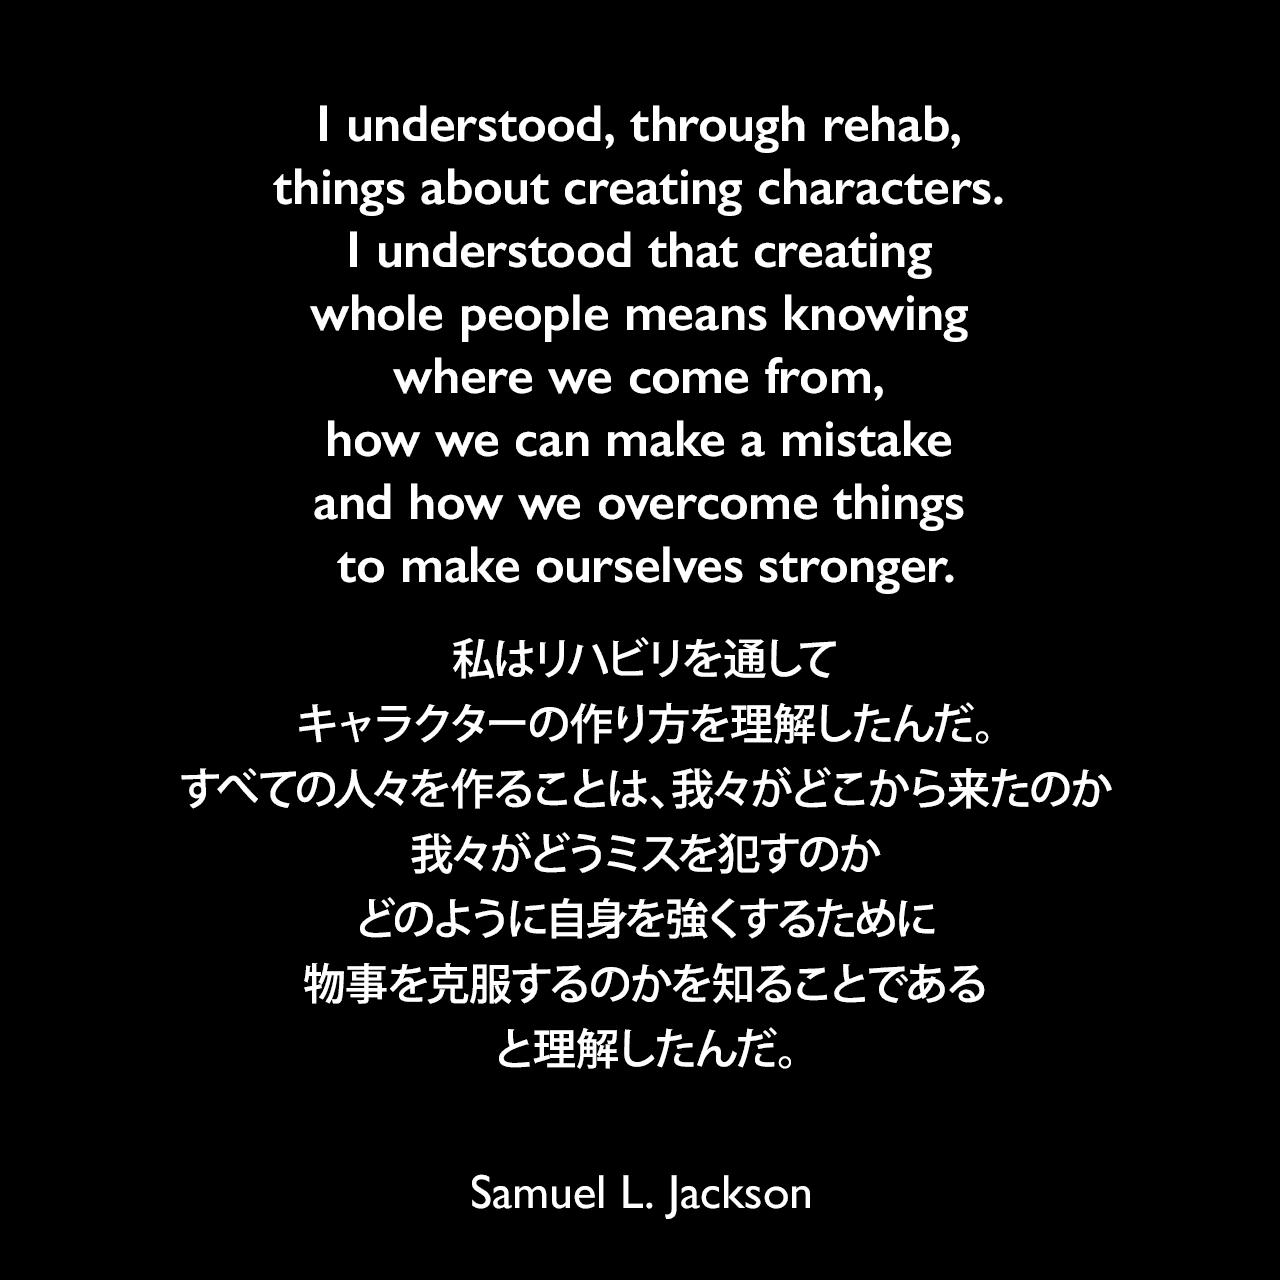 I understood, through rehab, things about creating characters. I understood that creating whole people means knowing where we come from, how we can make a mistake and how we overcome things to make ourselves stronger.私はリハビリを通して、キャラクターの作り方を理解したんだ。すべての人々を作ることは、我々がどこから来たのか、我々がどうミスを犯すのか、どのように自身を強くするために物事を克服するのかを知ることである、と理解したんだ。Samuel Leroy Jackson